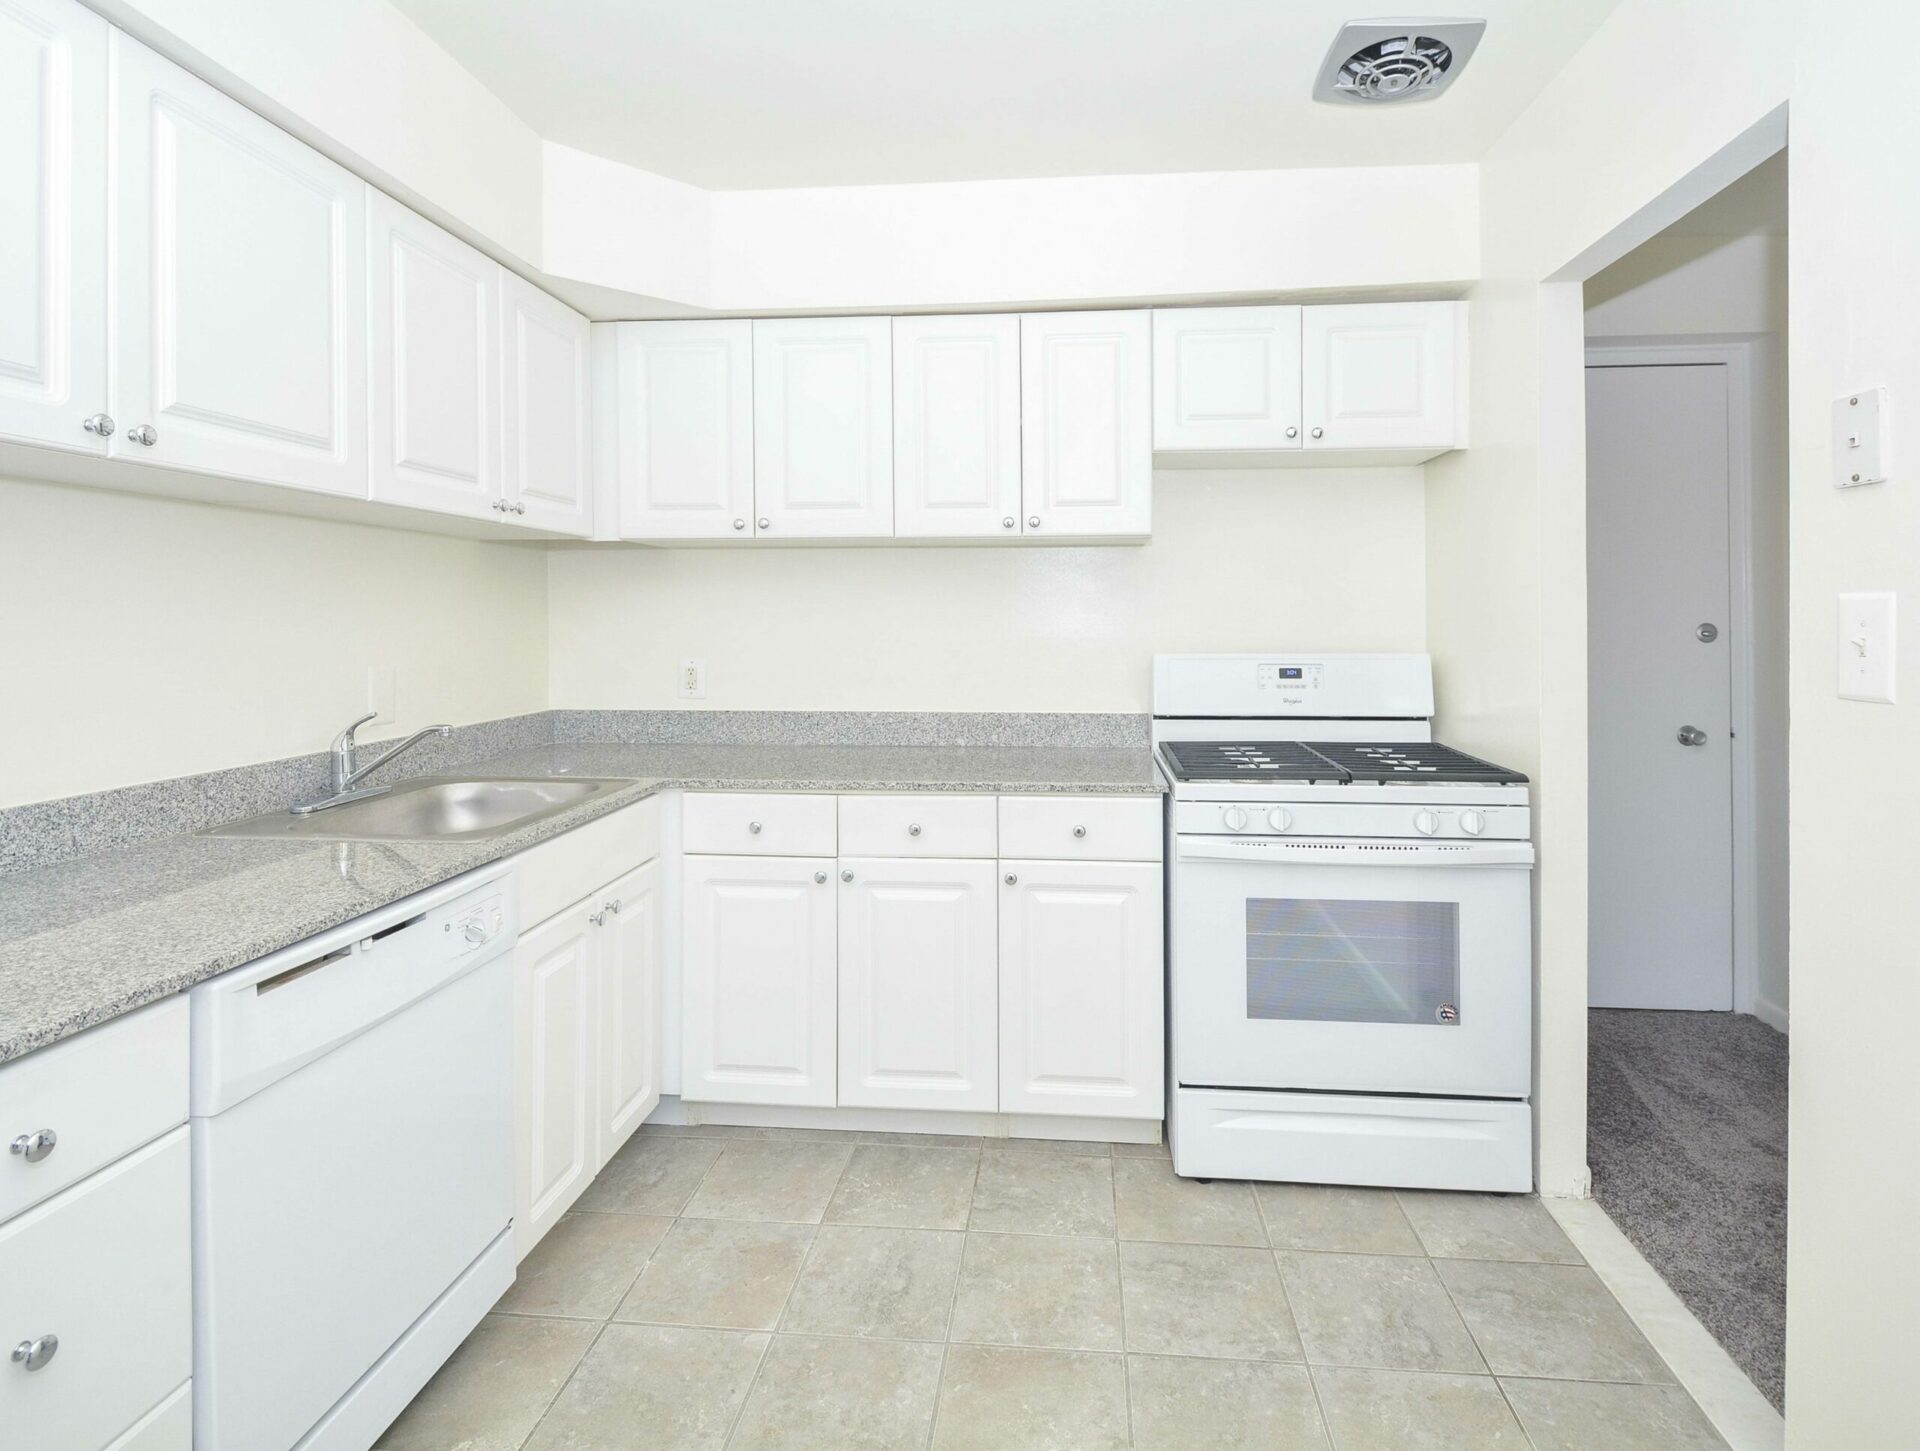 Kitchen area with white cabinets and white appliances.